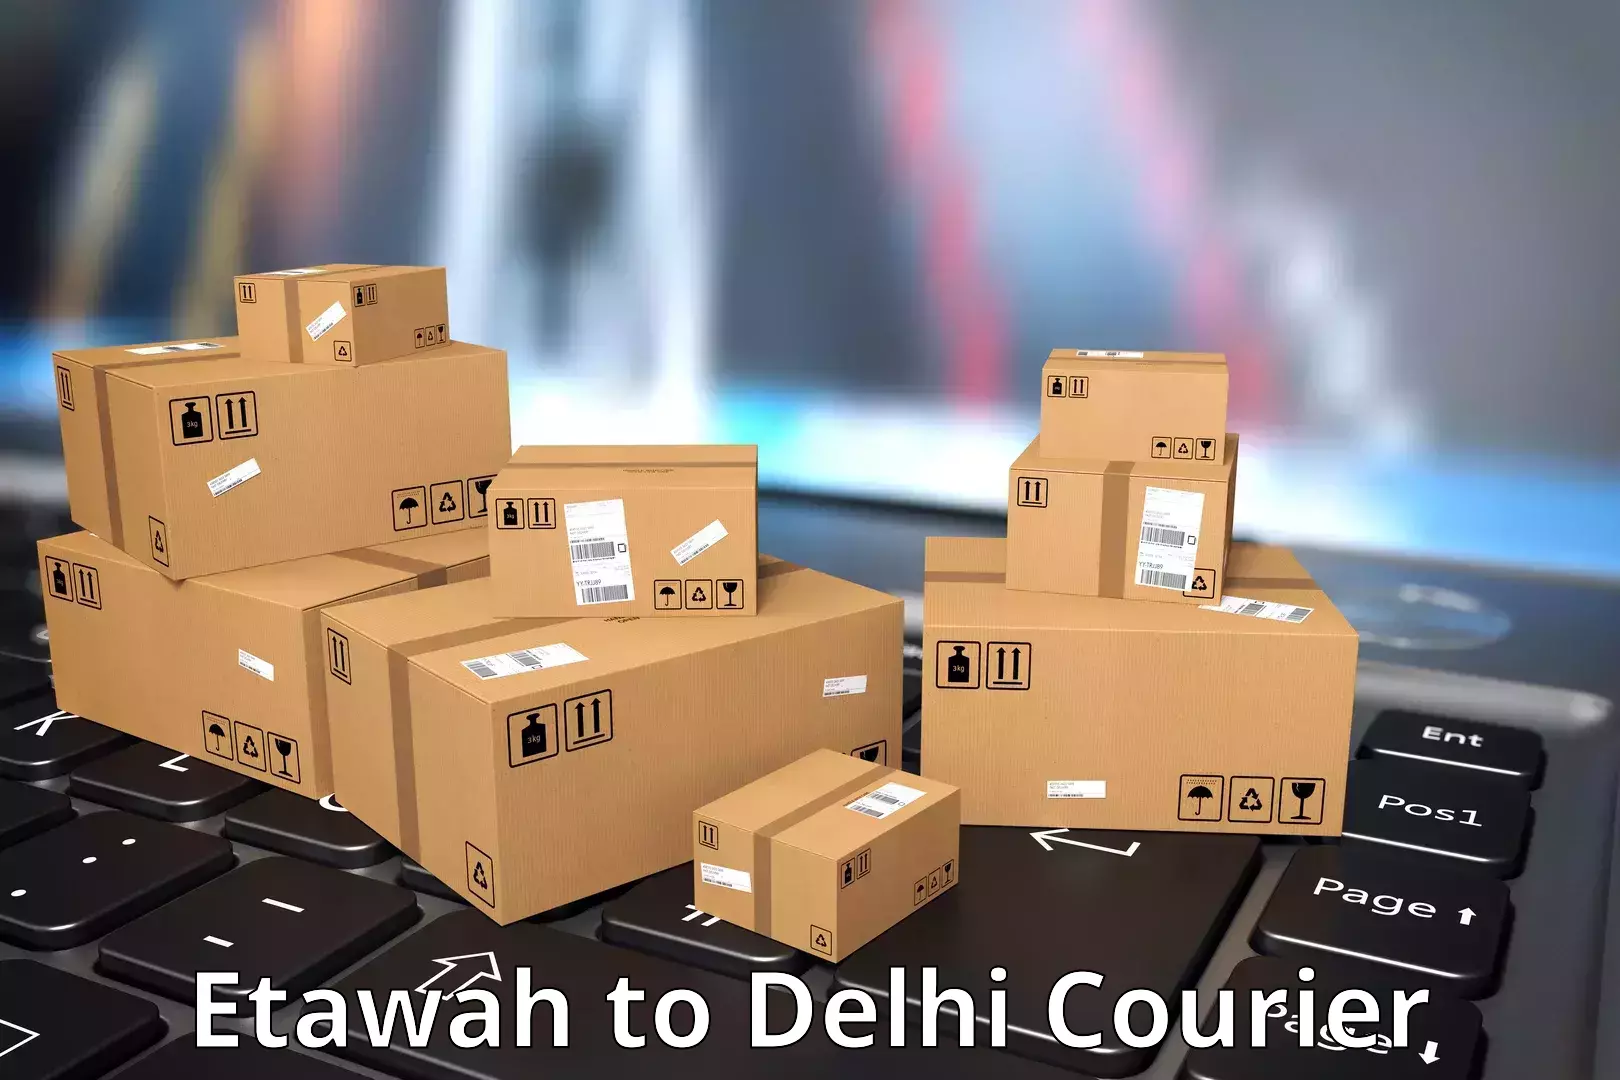 Affordable shipping solutions Etawah to NCR